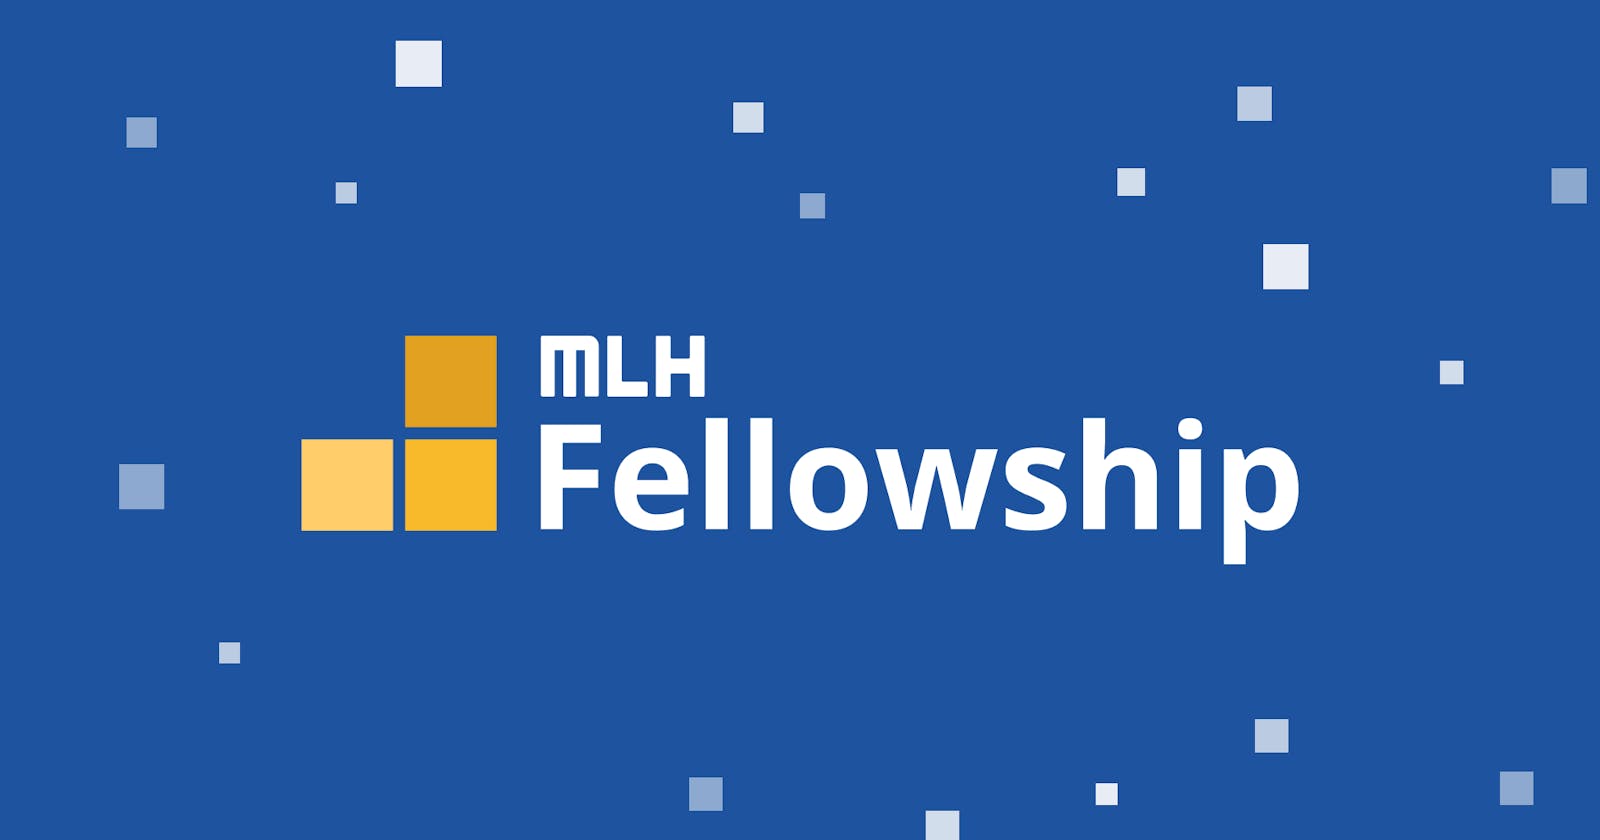 MLH Fellowship: The Ultimate Guide for Getting Selected